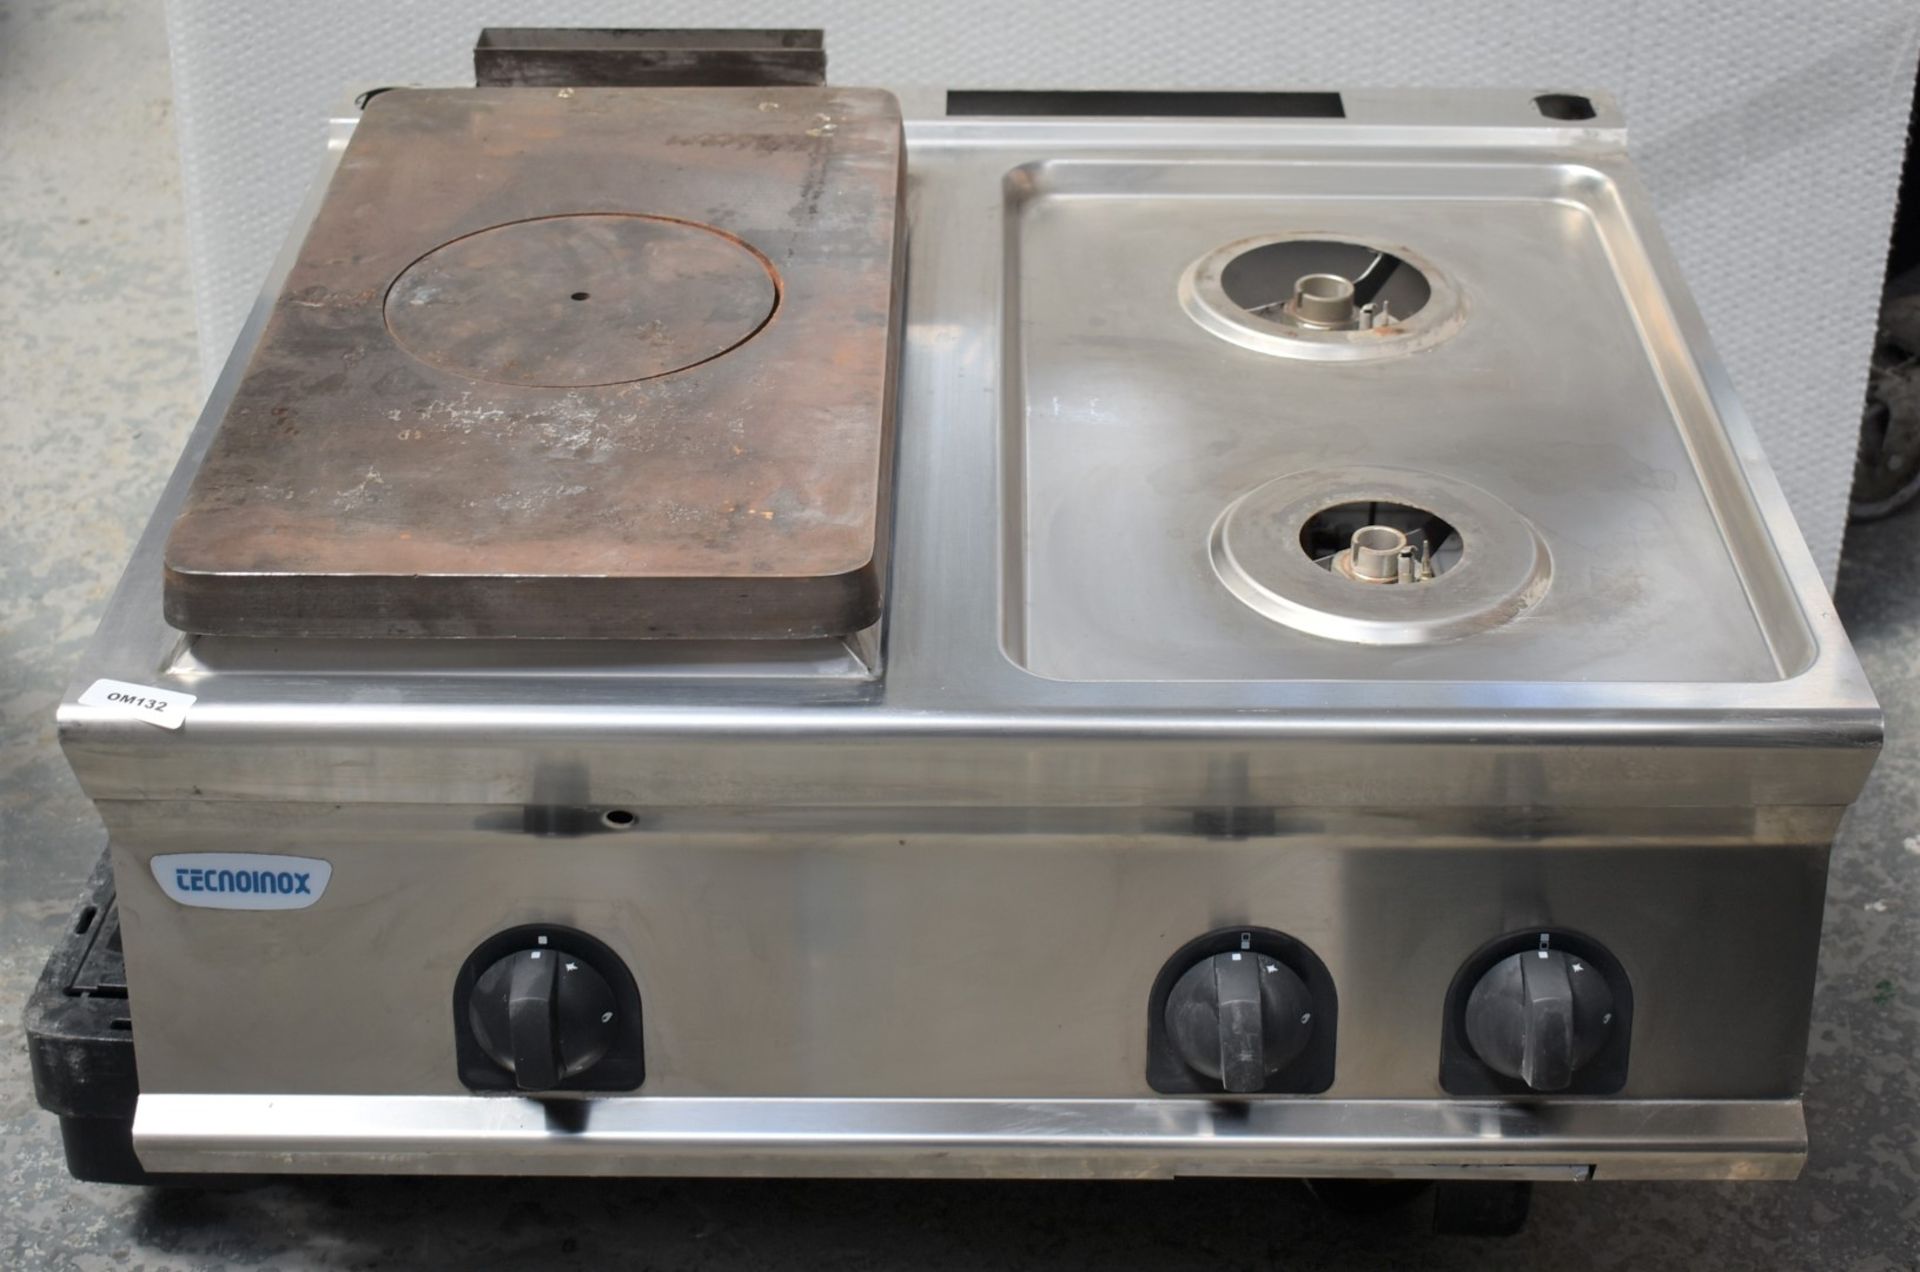 1 x Tecnoinox Cooking Station With Griddle and Two Burner Hob - Model PPC8G7 - RRP £2,225 - Image 2 of 10